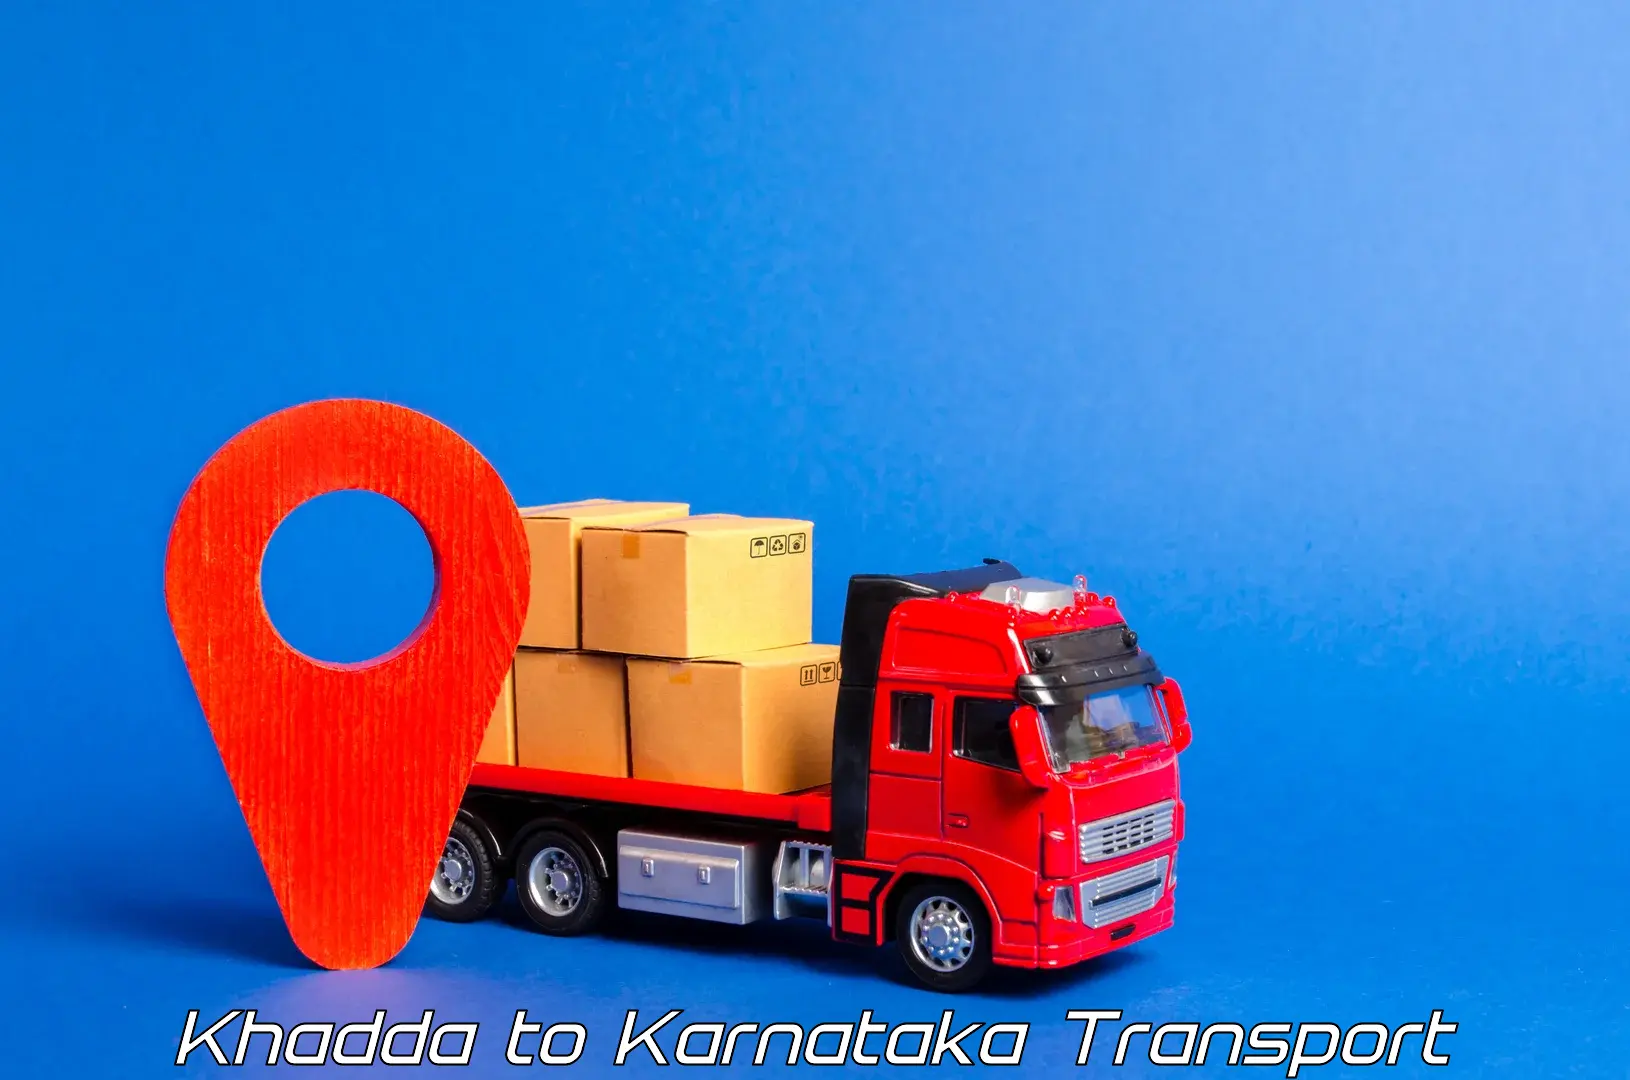 Air freight transport services Khadda to Mulbagal